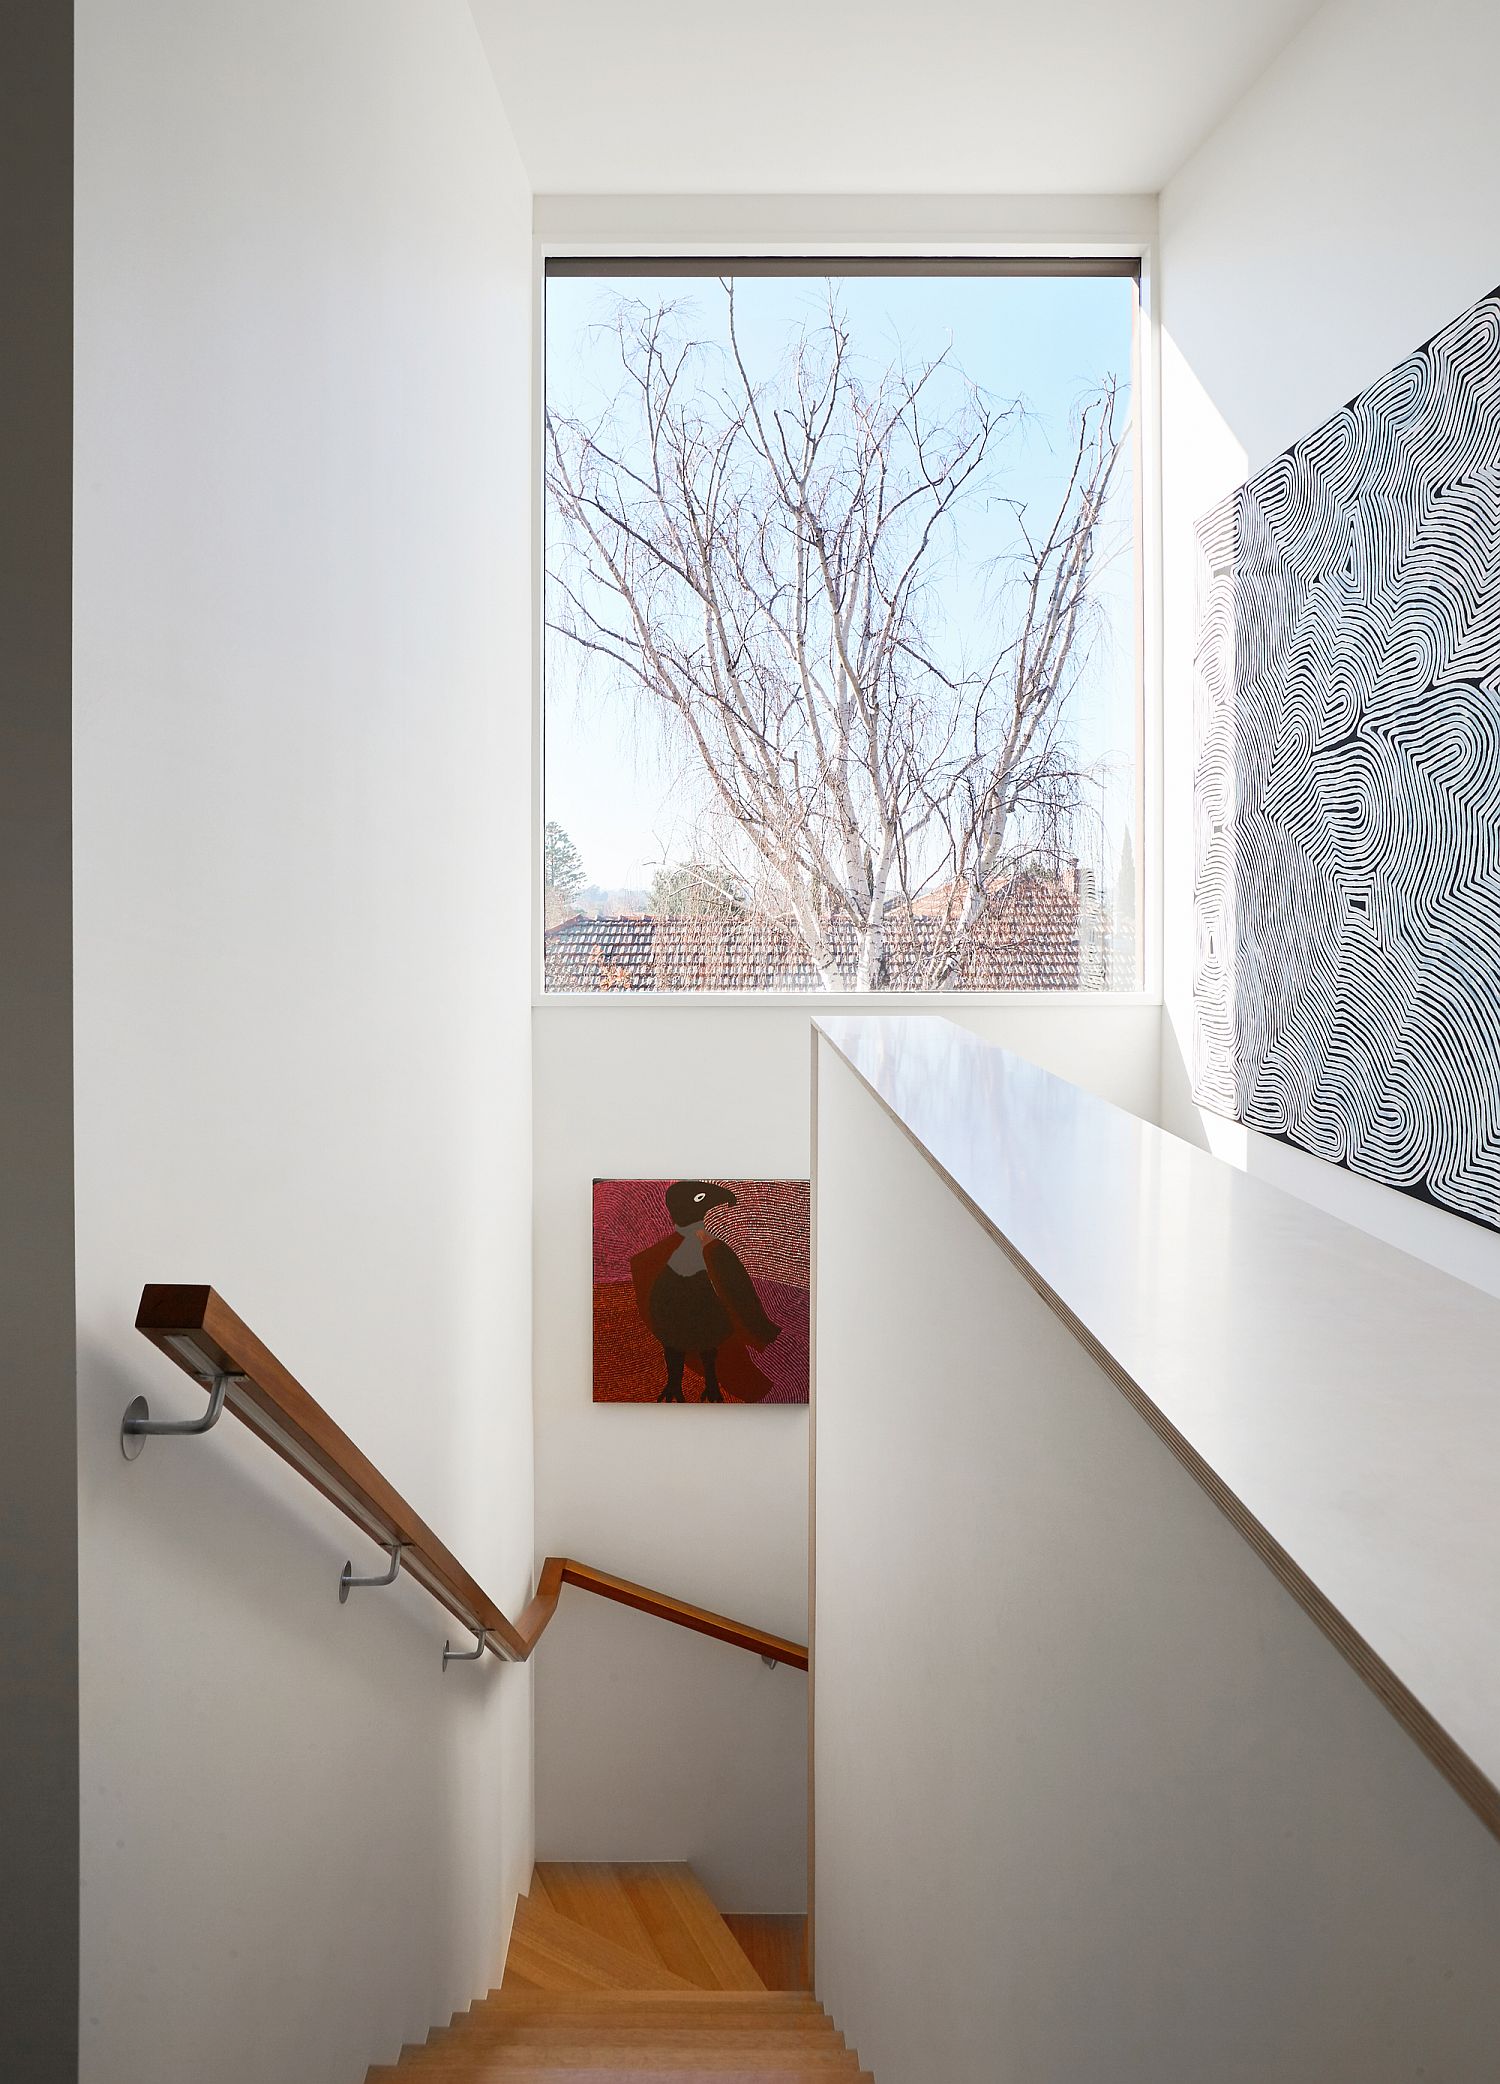 Window-for-the-stairwell-brings-light-into-different-levels-of-the-house